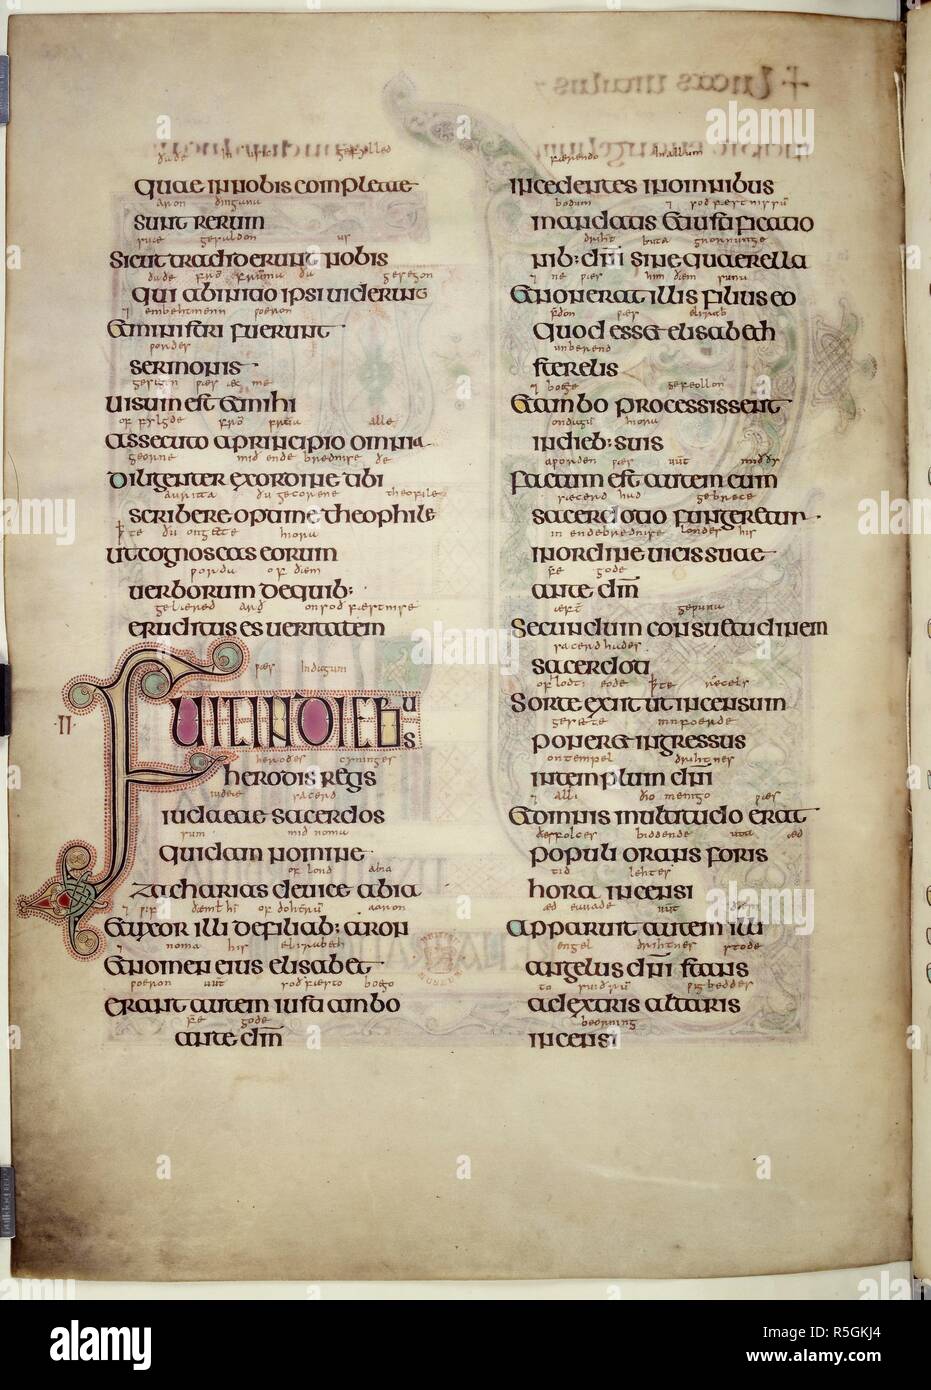 Gospel of St Luke. Lindisfarne Gospels. N.E. England [Lindisfarne]; 710-721. [Whole folio] St Luke's Gospel, chapter 1, verses 1-12. Verse 5 beginning with initial 'F', with interlace decoration  Image taken from Lindisfarne Gospels.  Originally published/produced in N.E. England [Lindisfarne]; 710-721. . Source: Cotton Nero D. IV, f.139v. Language: Latin, with Anglo-Saxon glosses. Stock Photo